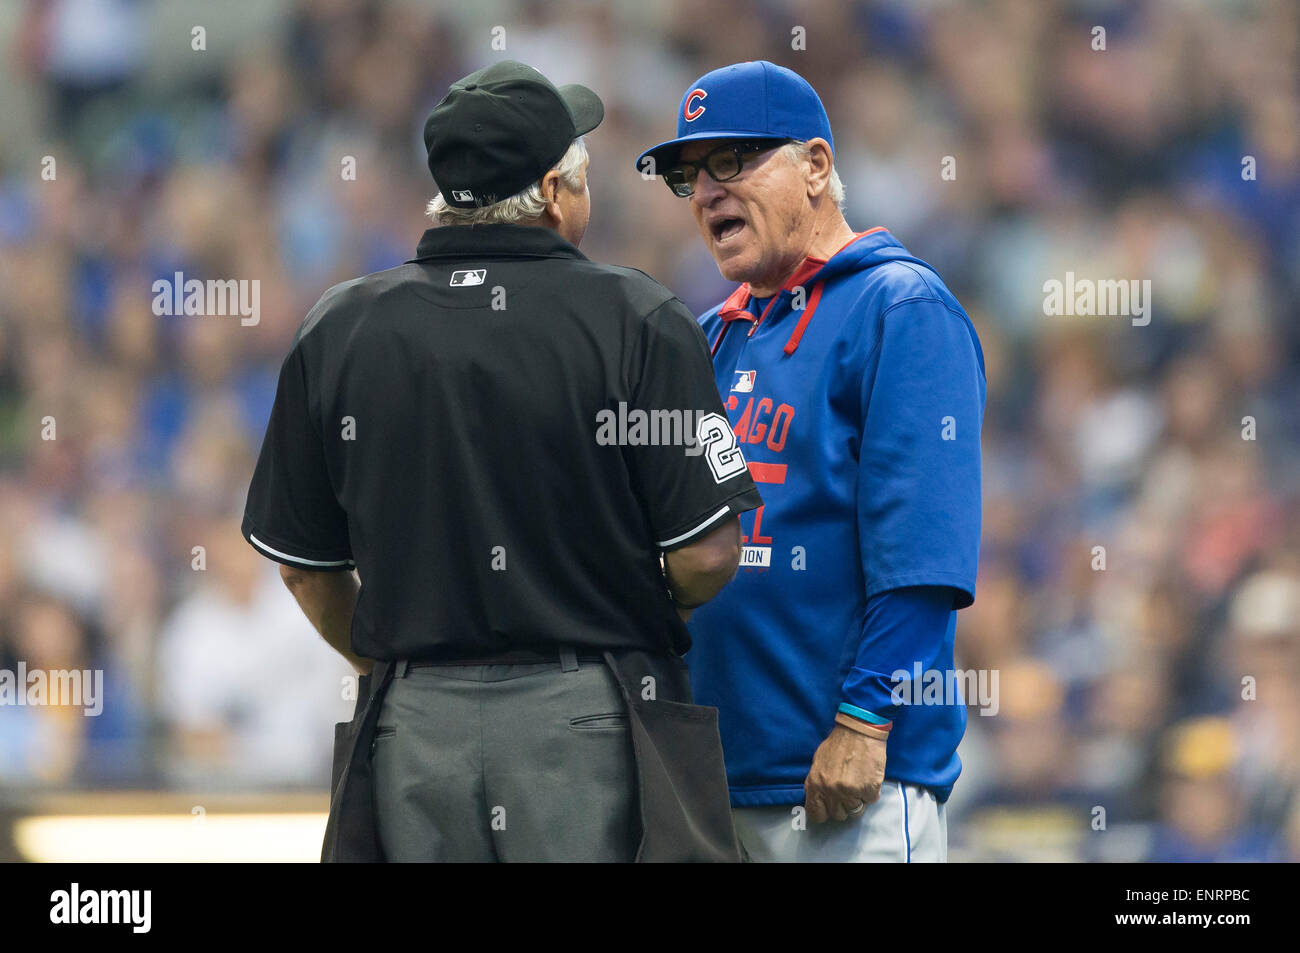 Milwaukee, WI, USA. 9th May, 2015. Chicago Cubs manager Joe Maddon #70 talks with home plate umpire Tom Hallion about a trapped ball under the center field fence during the Major League Baseball game between the Milwaukee Brewers and the Chicago Cubs at Miller Park in Milwaukee, WI. John Fisher/CSM/Alamy Live News Stock Photo